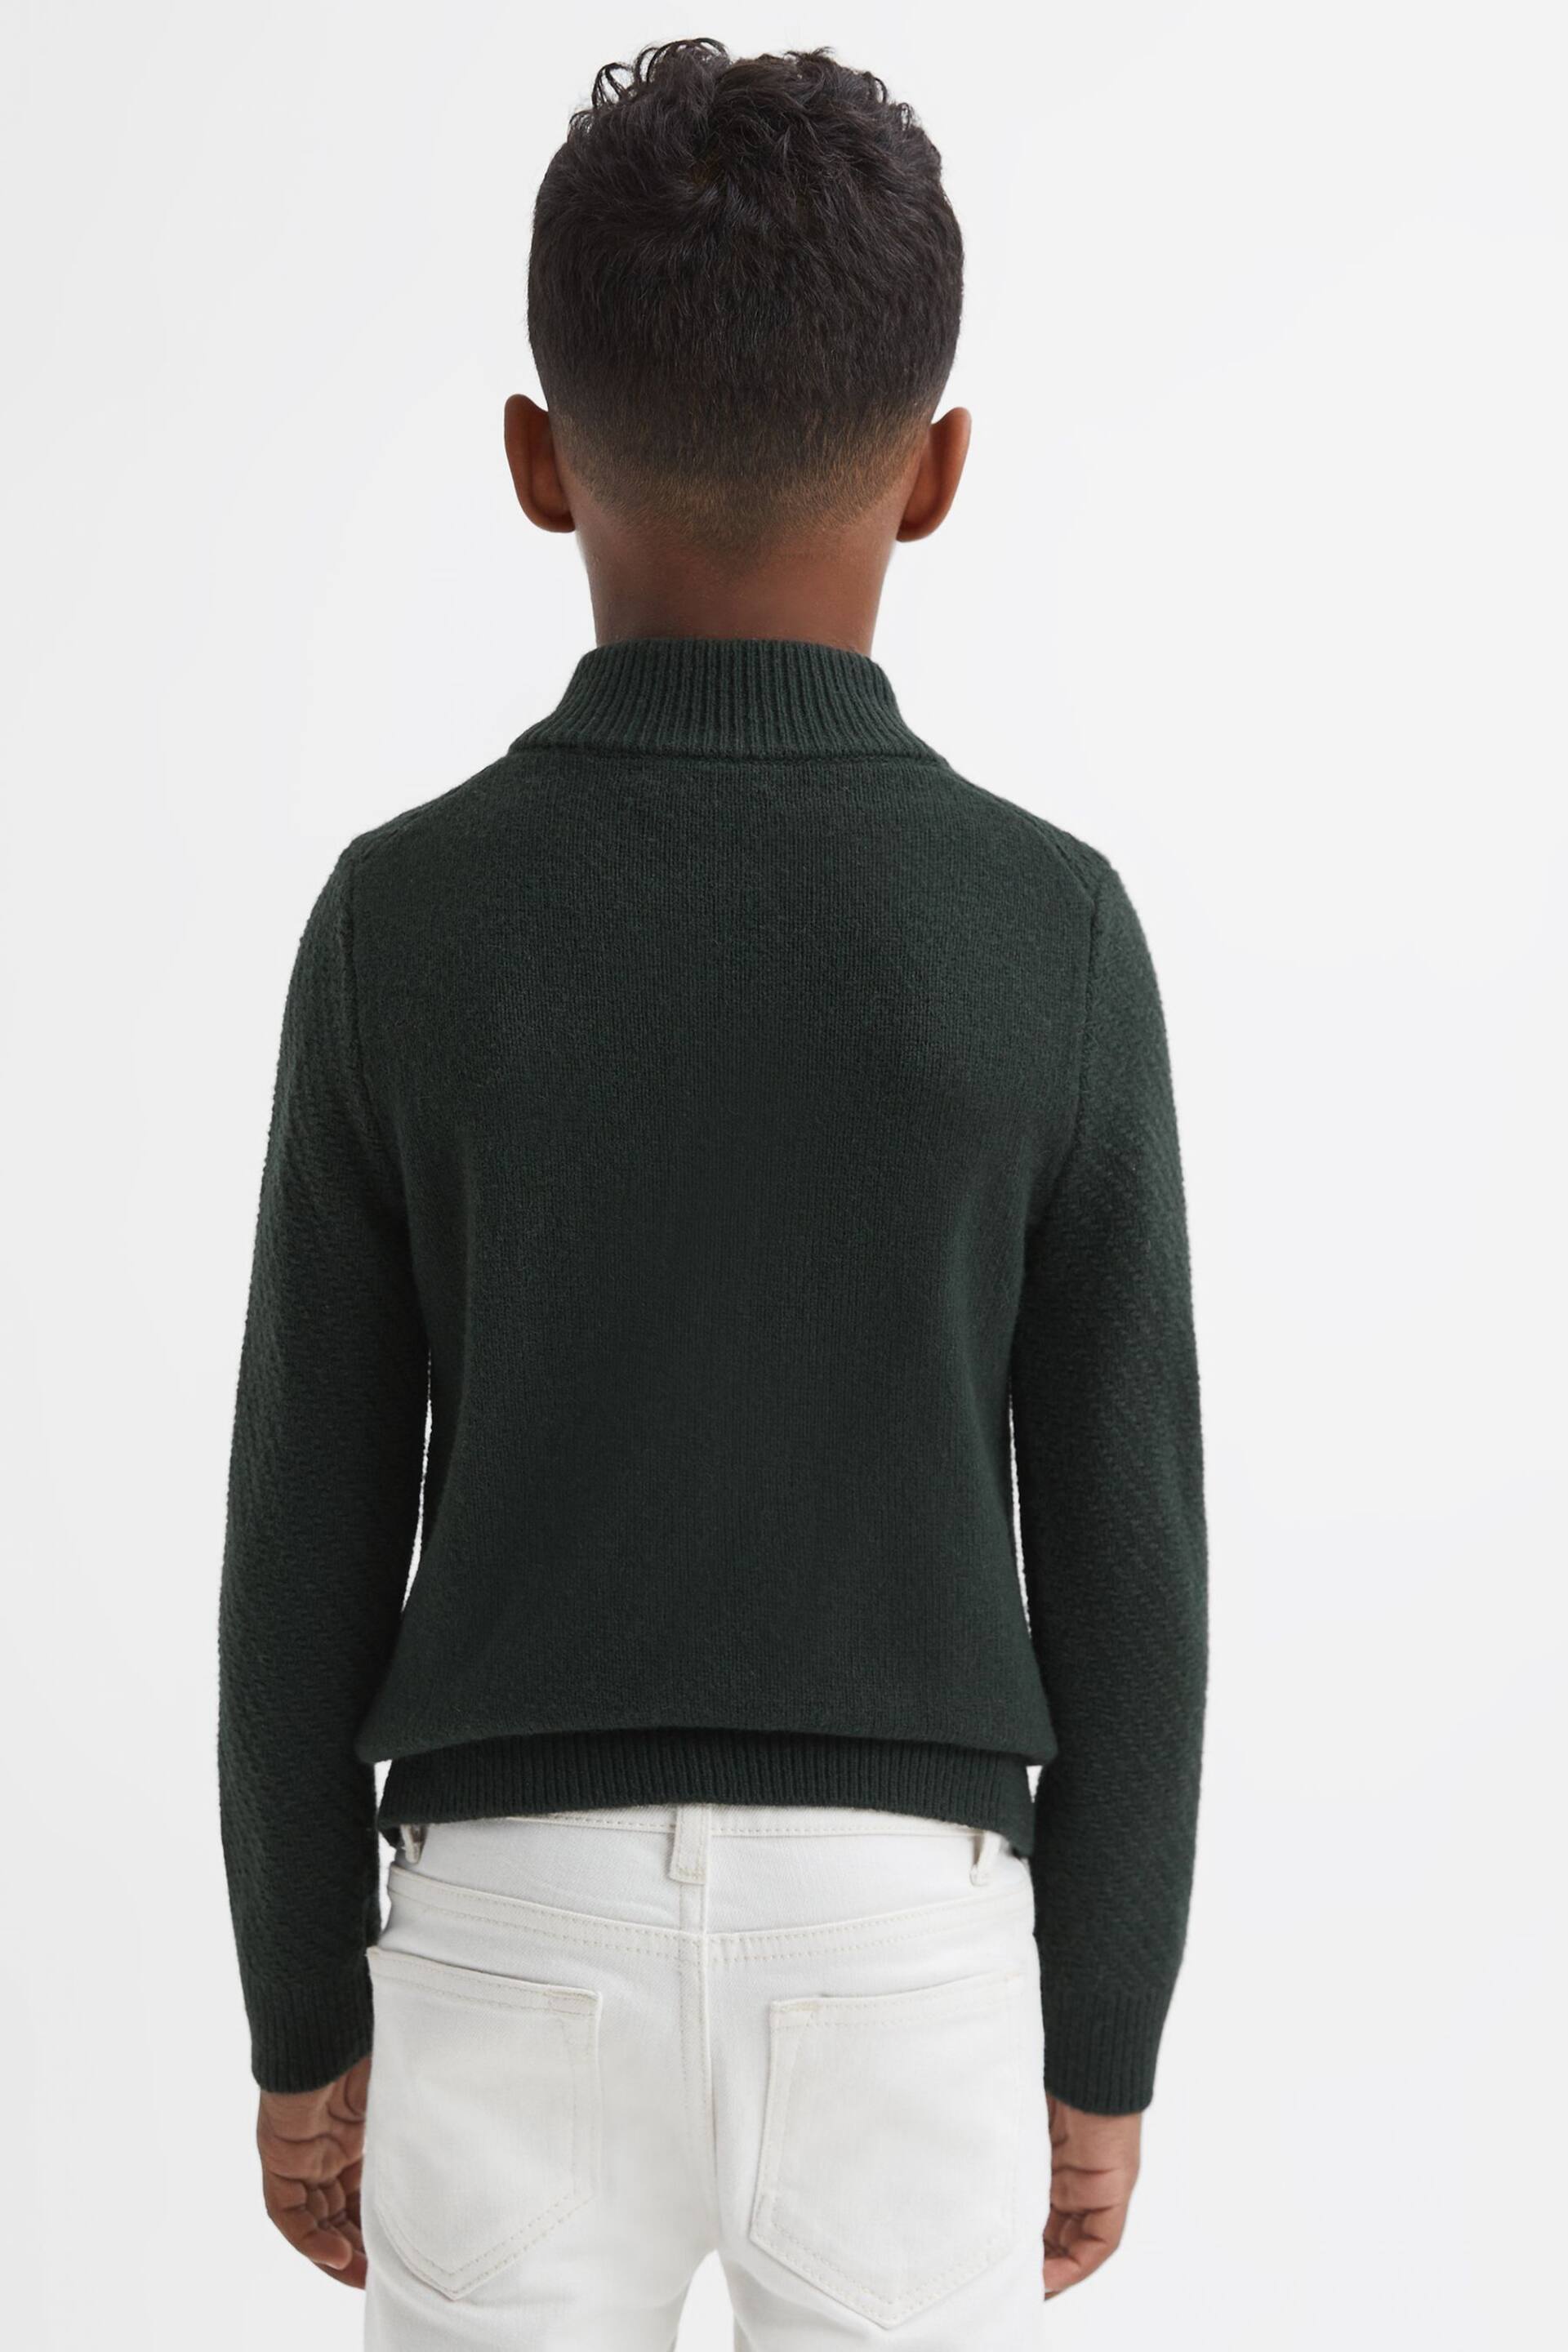 Reiss Forest Green Tempo Senior Slim Fit Knitted Half-Zip Funnel Neck Jumper - Image 3 of 5